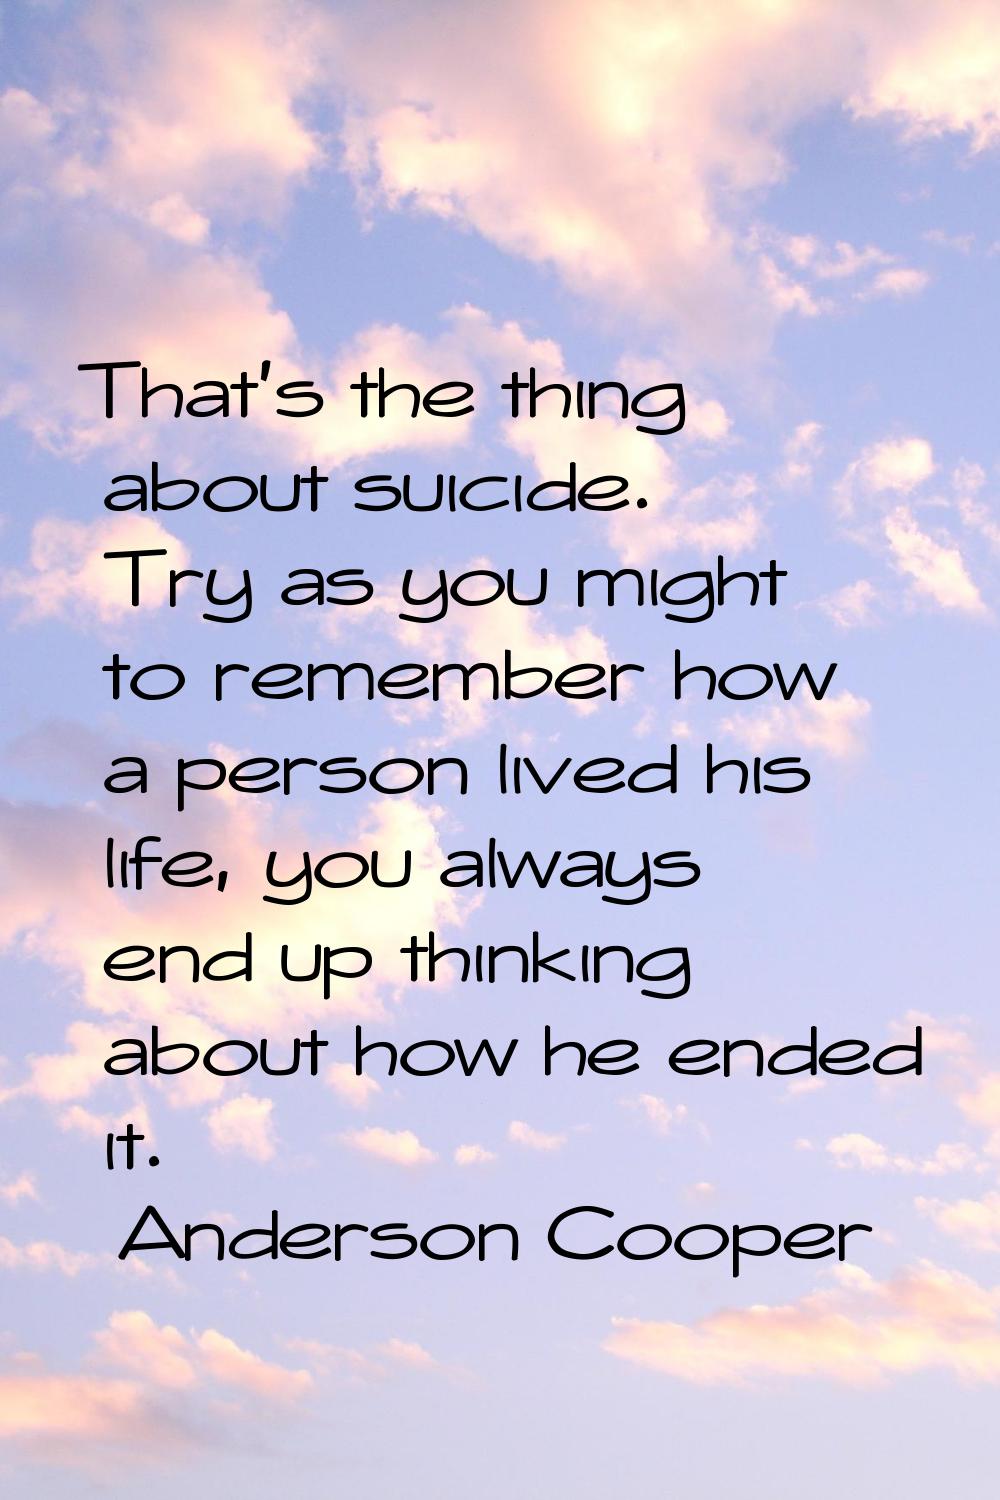 That's the thing about suicide. Try as you might to remember how a person lived his life, you alway